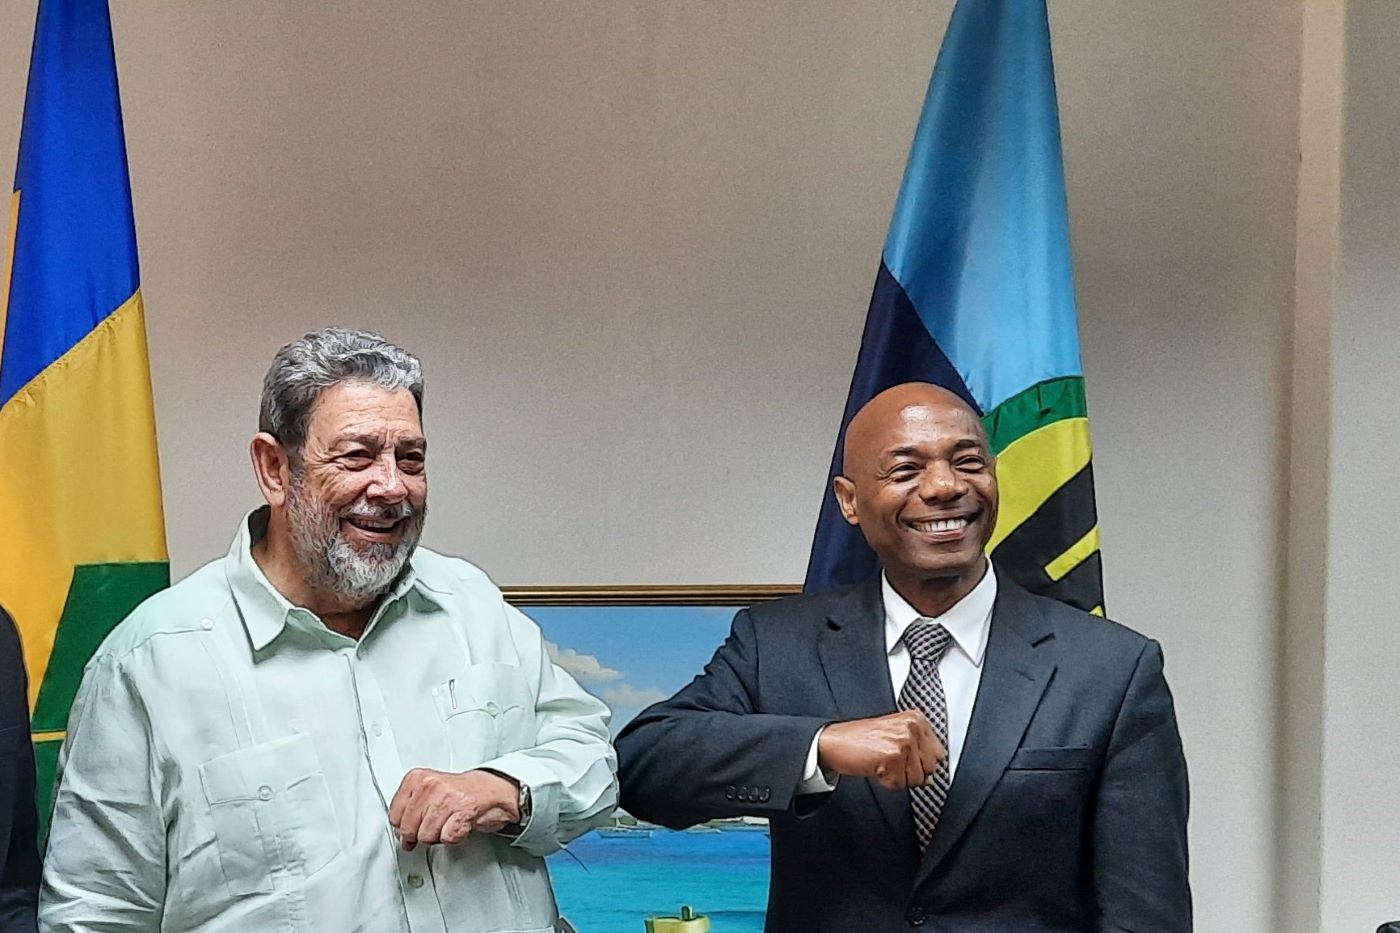 Photo #2  President of the Caribbean Development Bank (CDB) Dr. Gene Leon (left) is warmly greeted by Prime Minister of St. Vincent and the Grenadines, (SVG) Dr. Ralph Gonsalves 